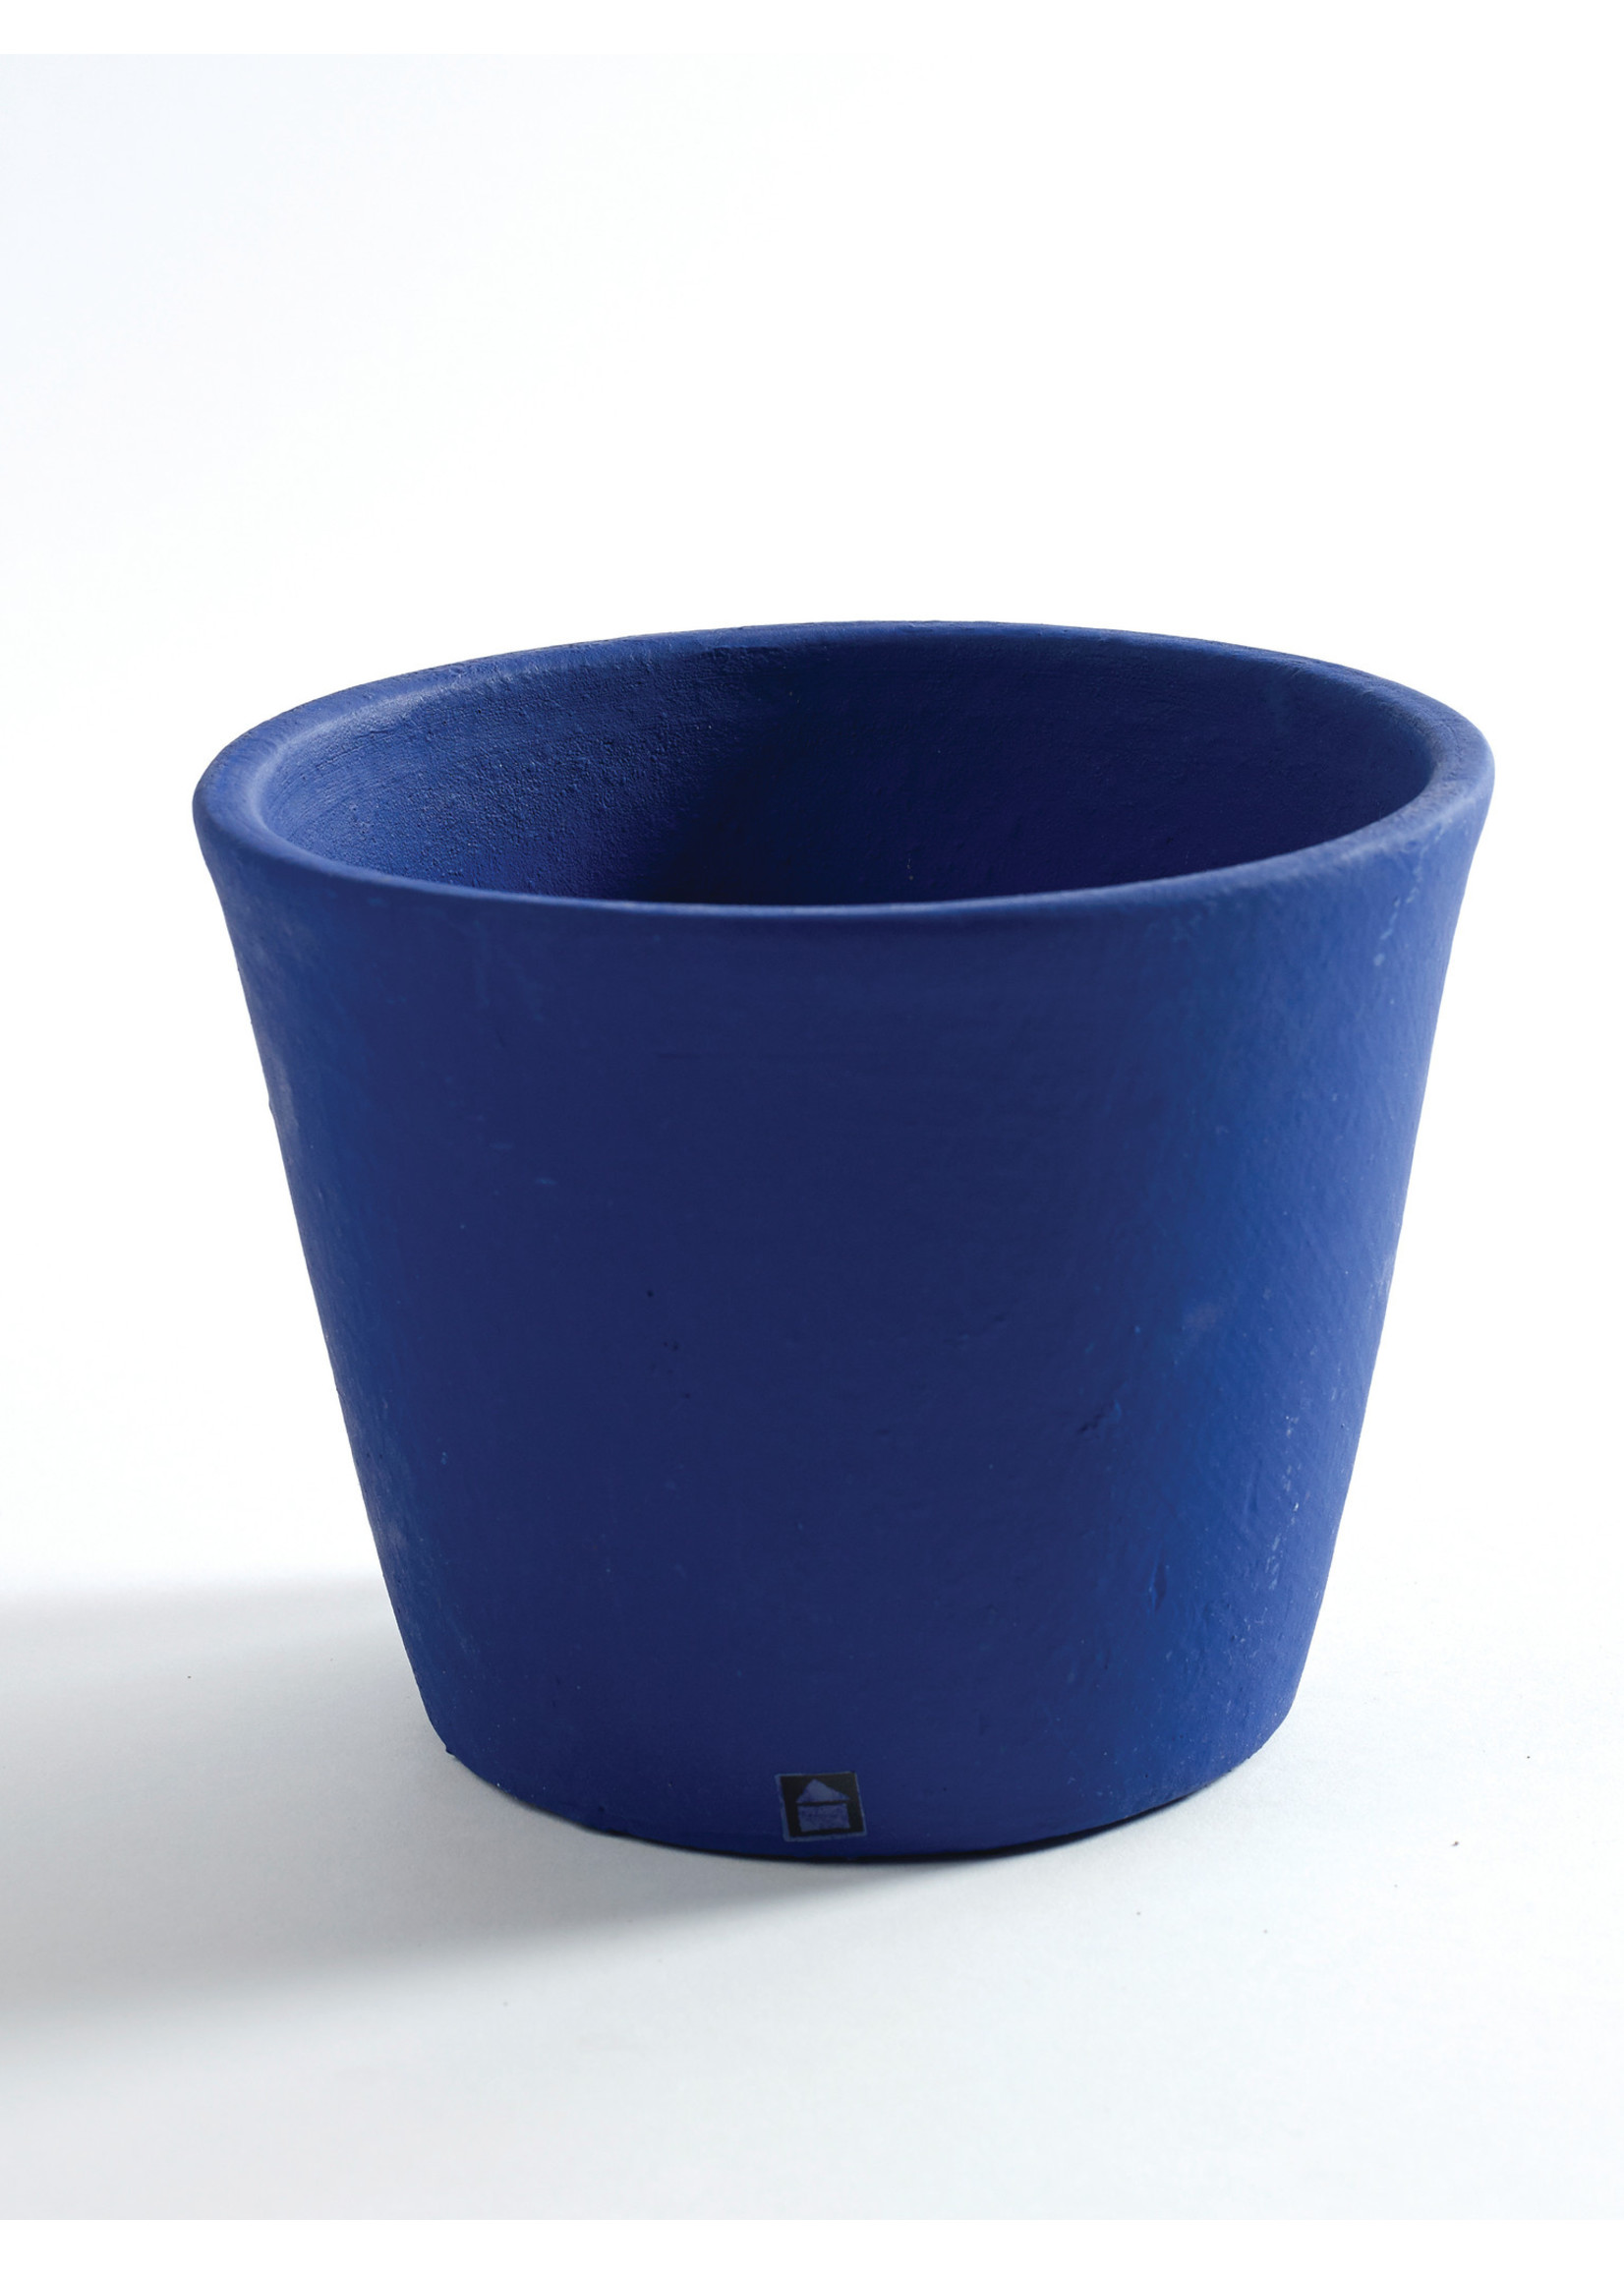 Container Ø14 h12 - Navy blue